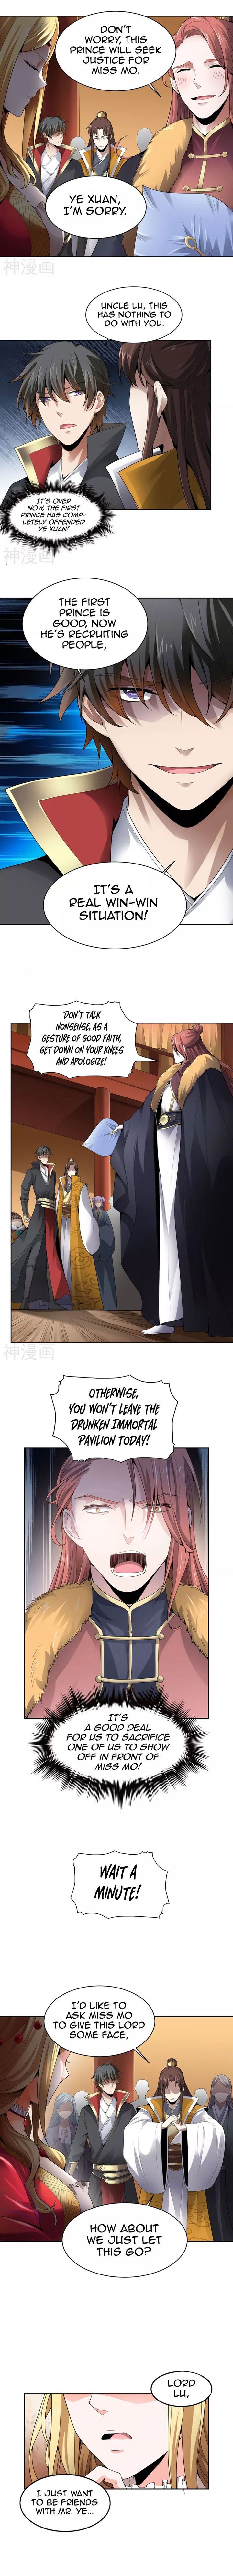 One Sword Reigns Supreme Chapter 30 Page 1